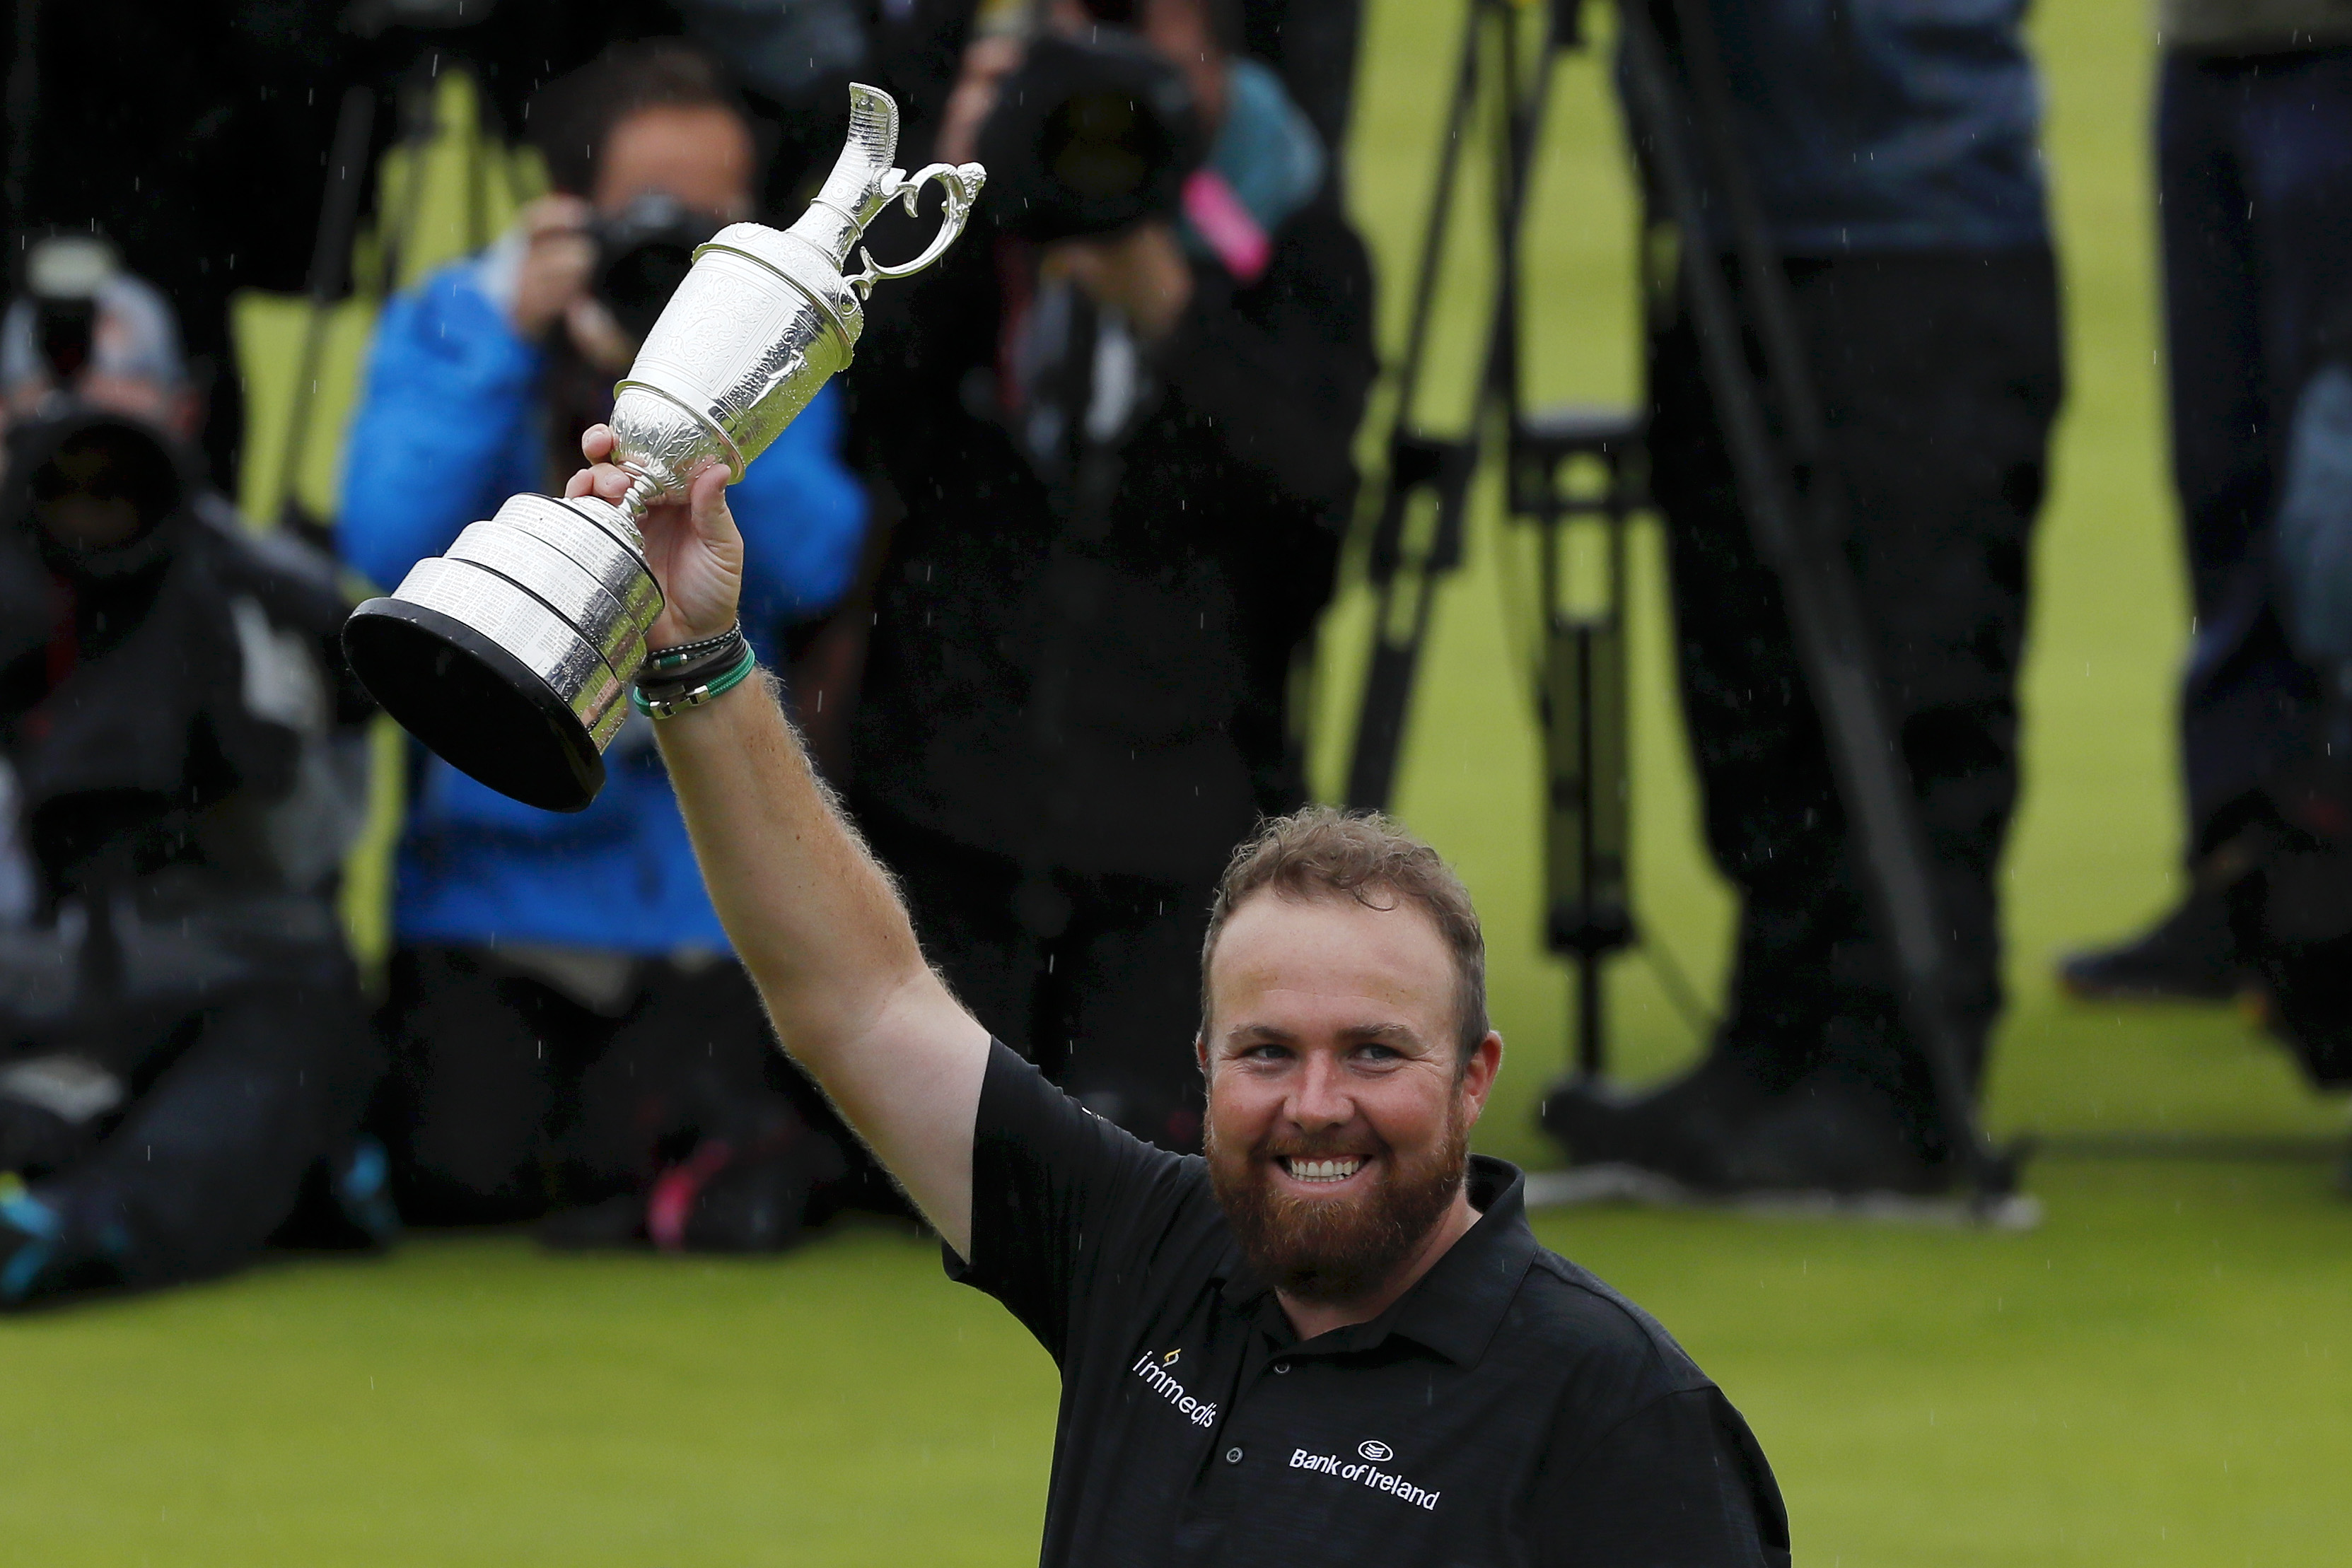 148th Open Championship - Day Four Getty Images